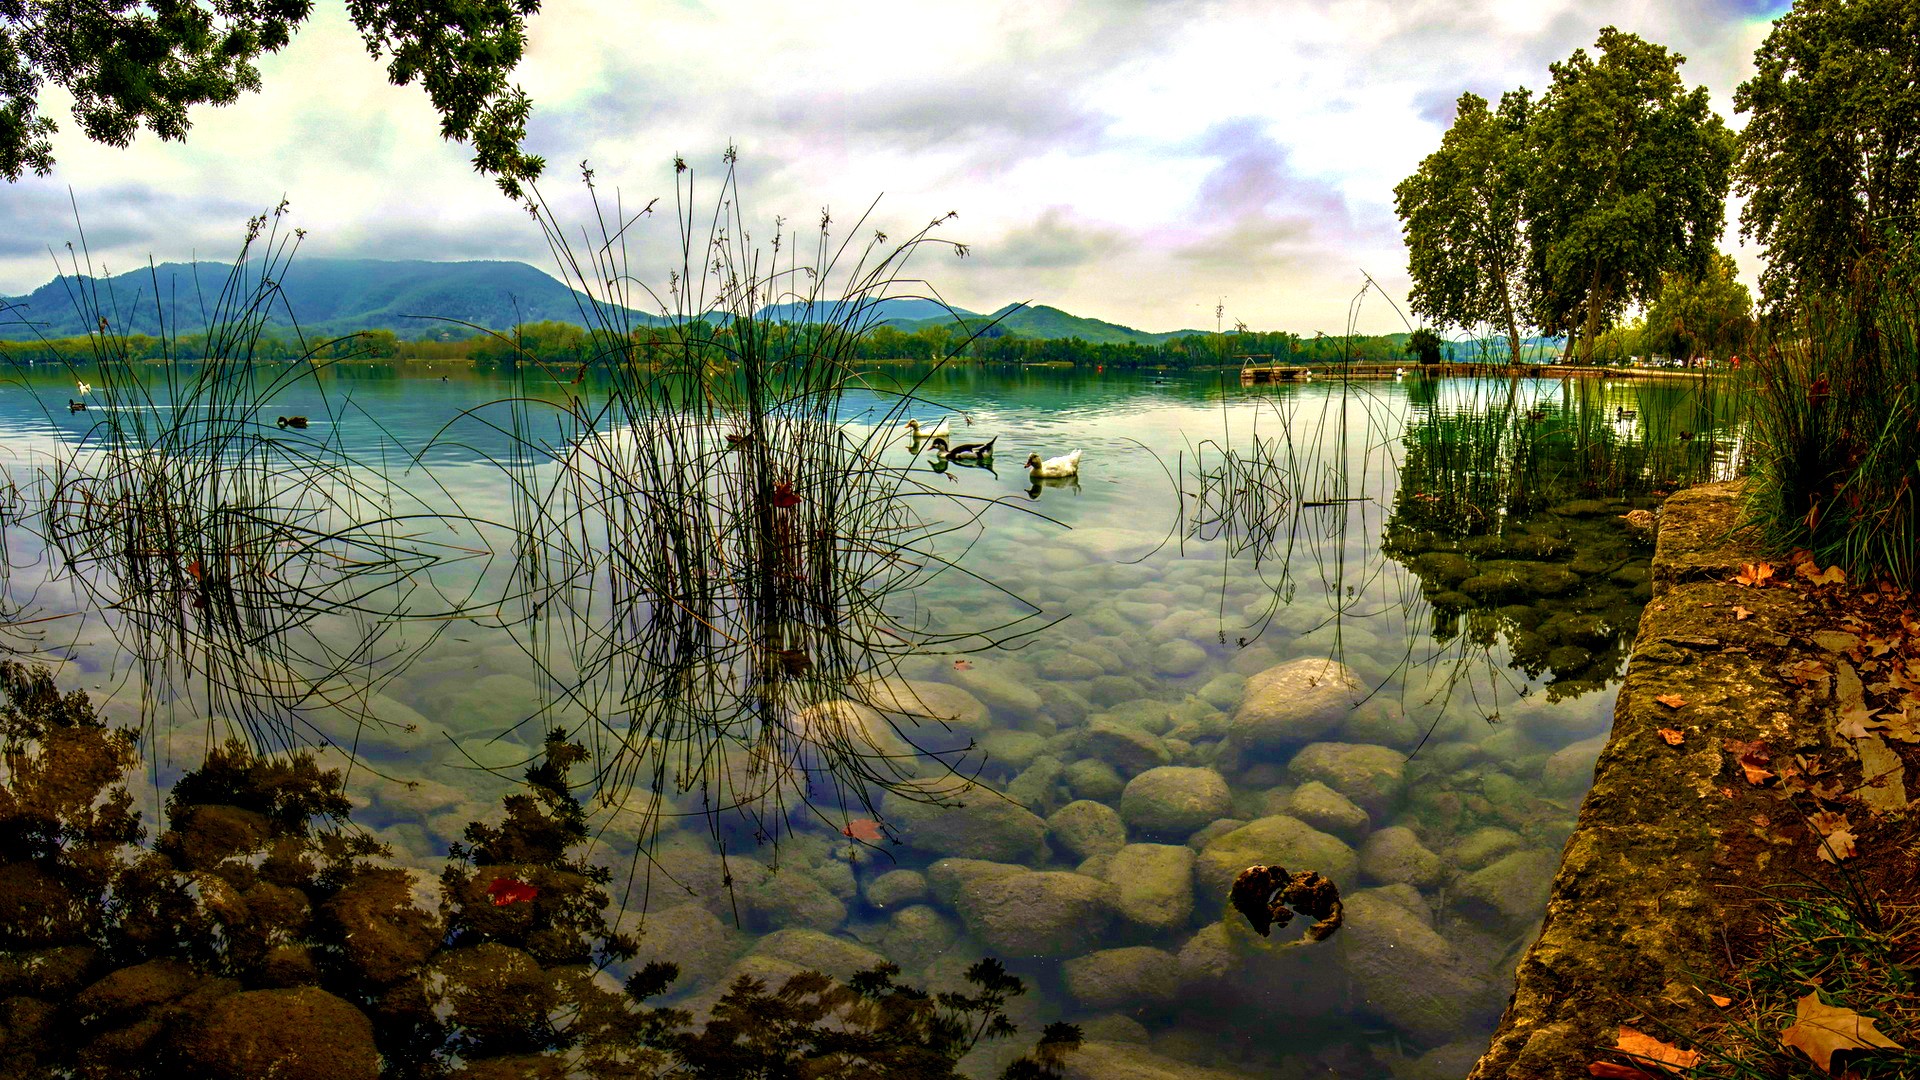 General 1920x1080 nature trees landscape water lake hills clouds stones pier reflection leaves